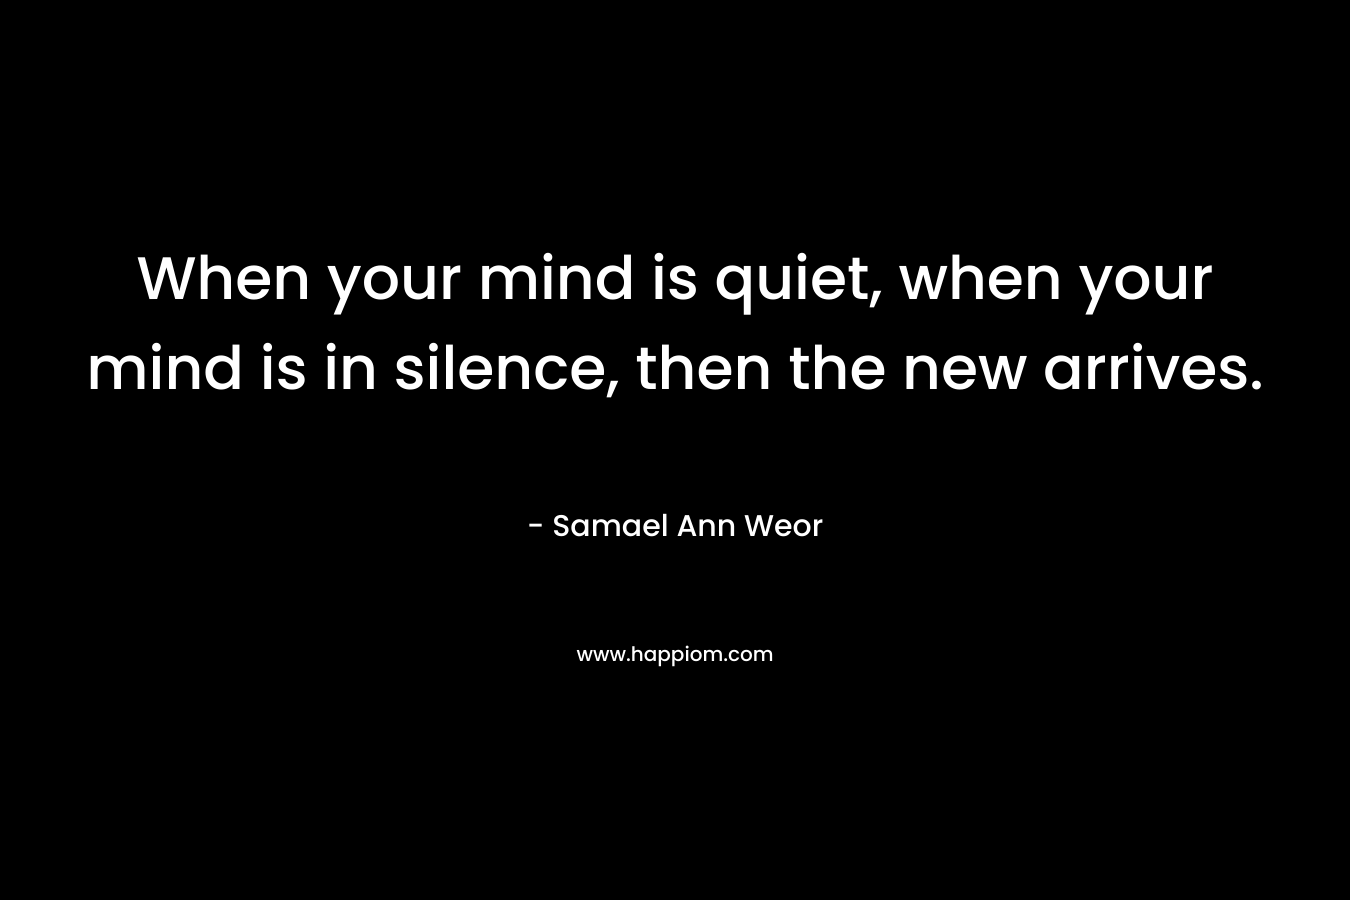 When your mind is quiet, when your mind is in silence, then the new arrives. – Samael Ann Weor